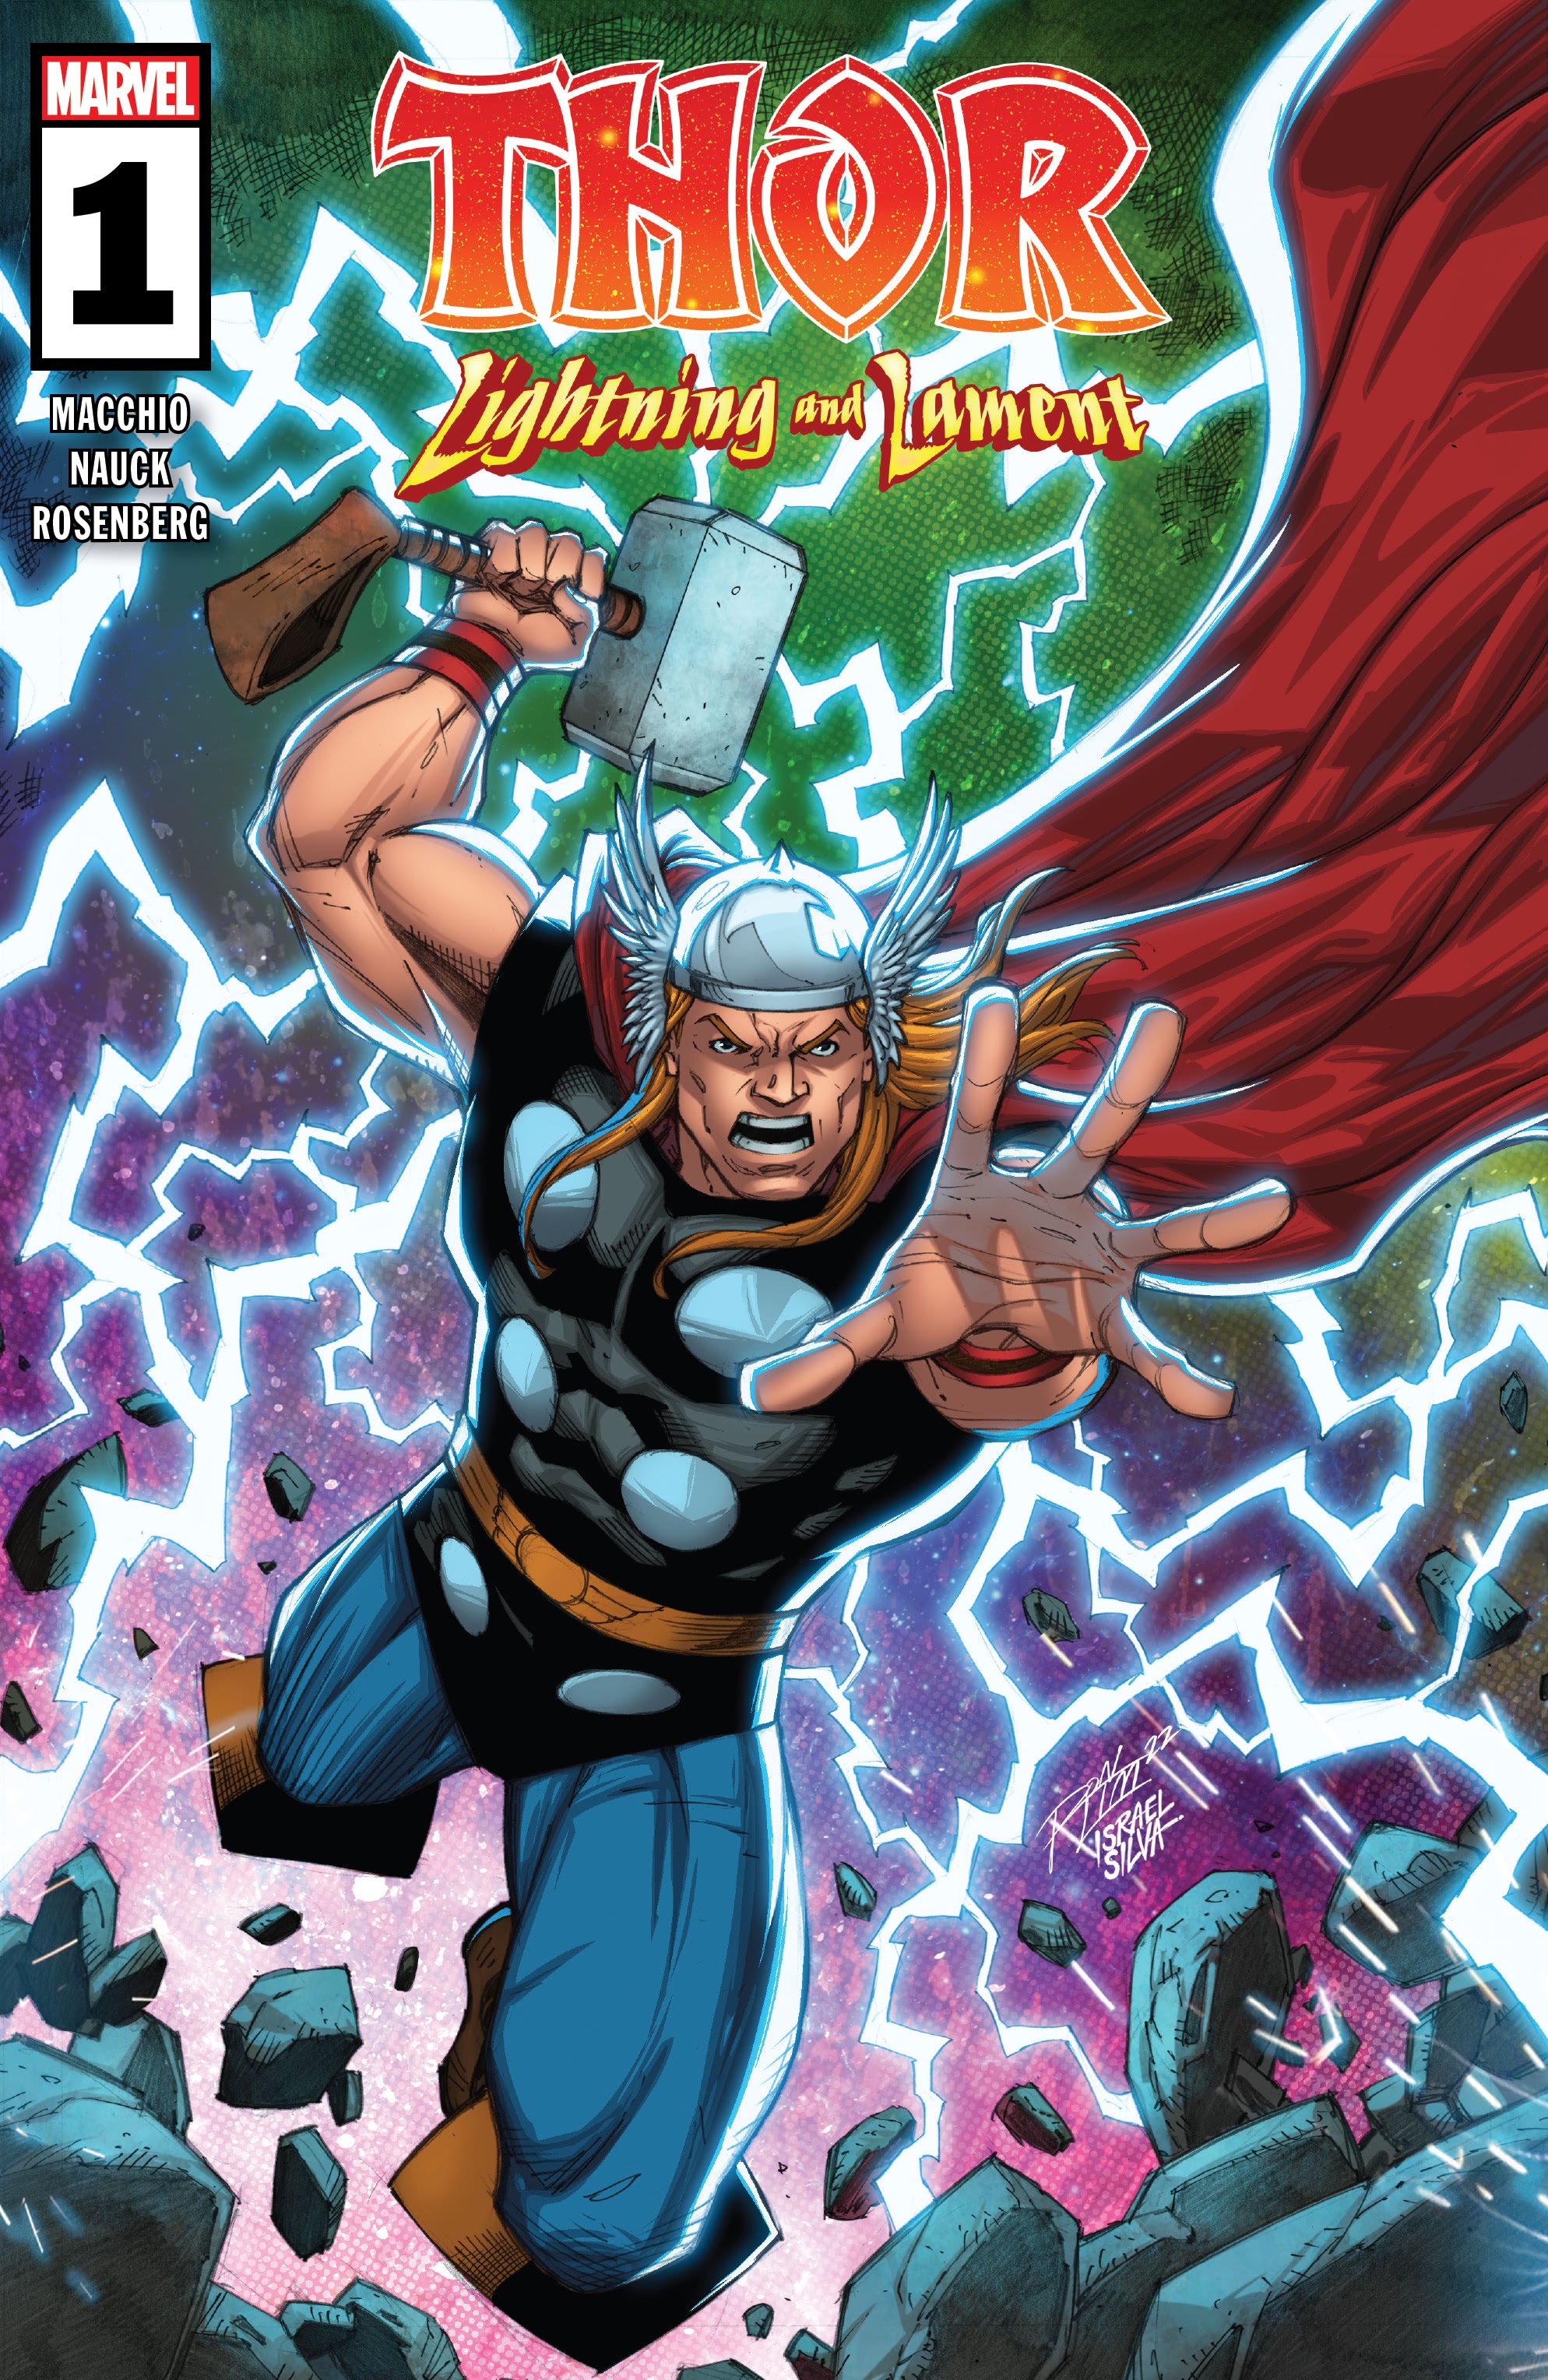 Read online Thor: Lightning and Lament comic -  Issue #1 - 1